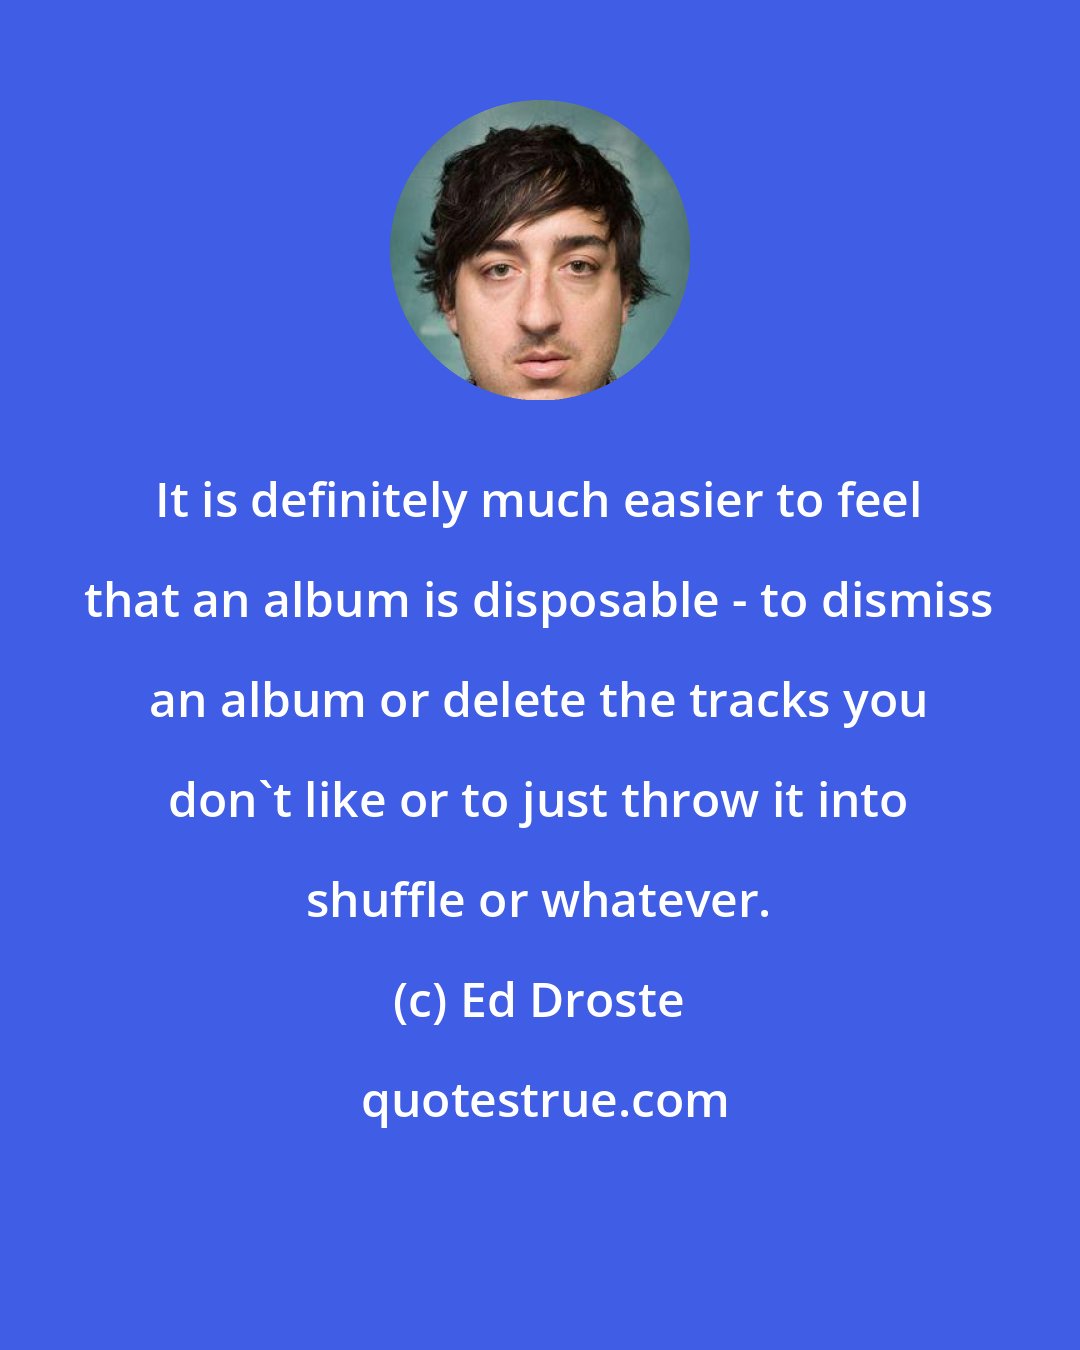 Ed Droste: It is definitely much easier to feel that an album is disposable - to dismiss an album or delete the tracks you don't like or to just throw it into shuffle or whatever.